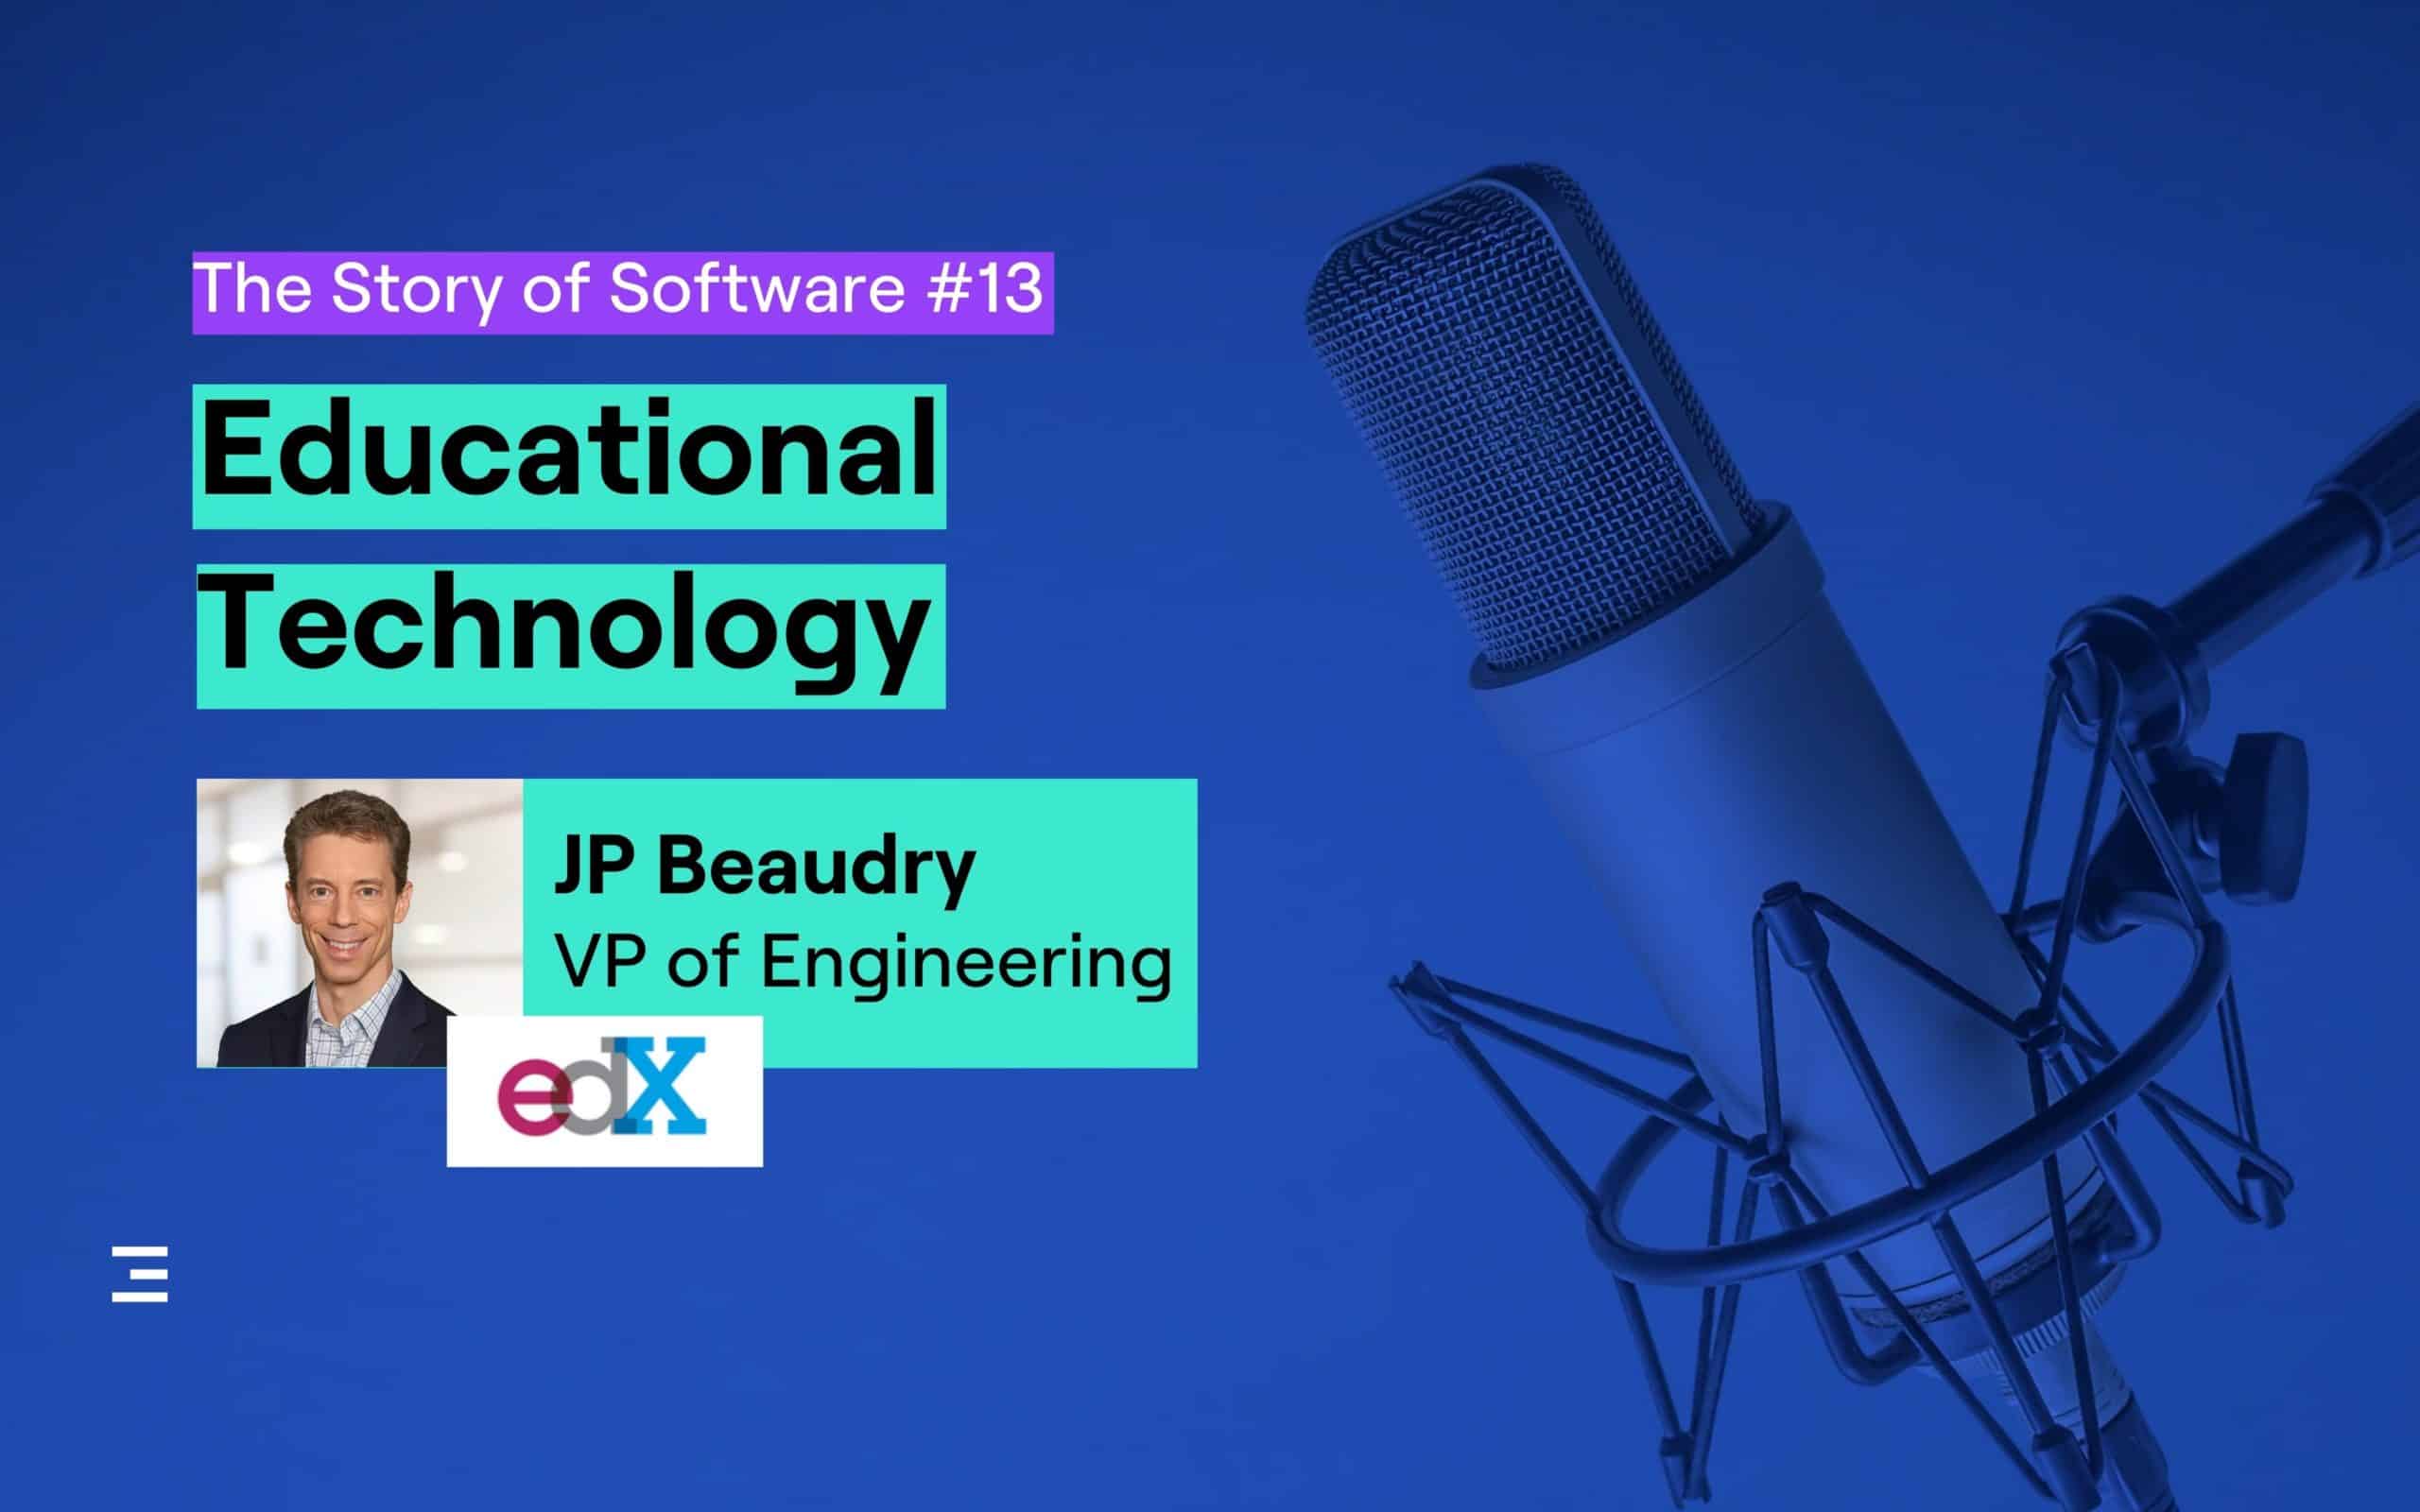 podcast by zartis - educational technology software with JP Beaudry